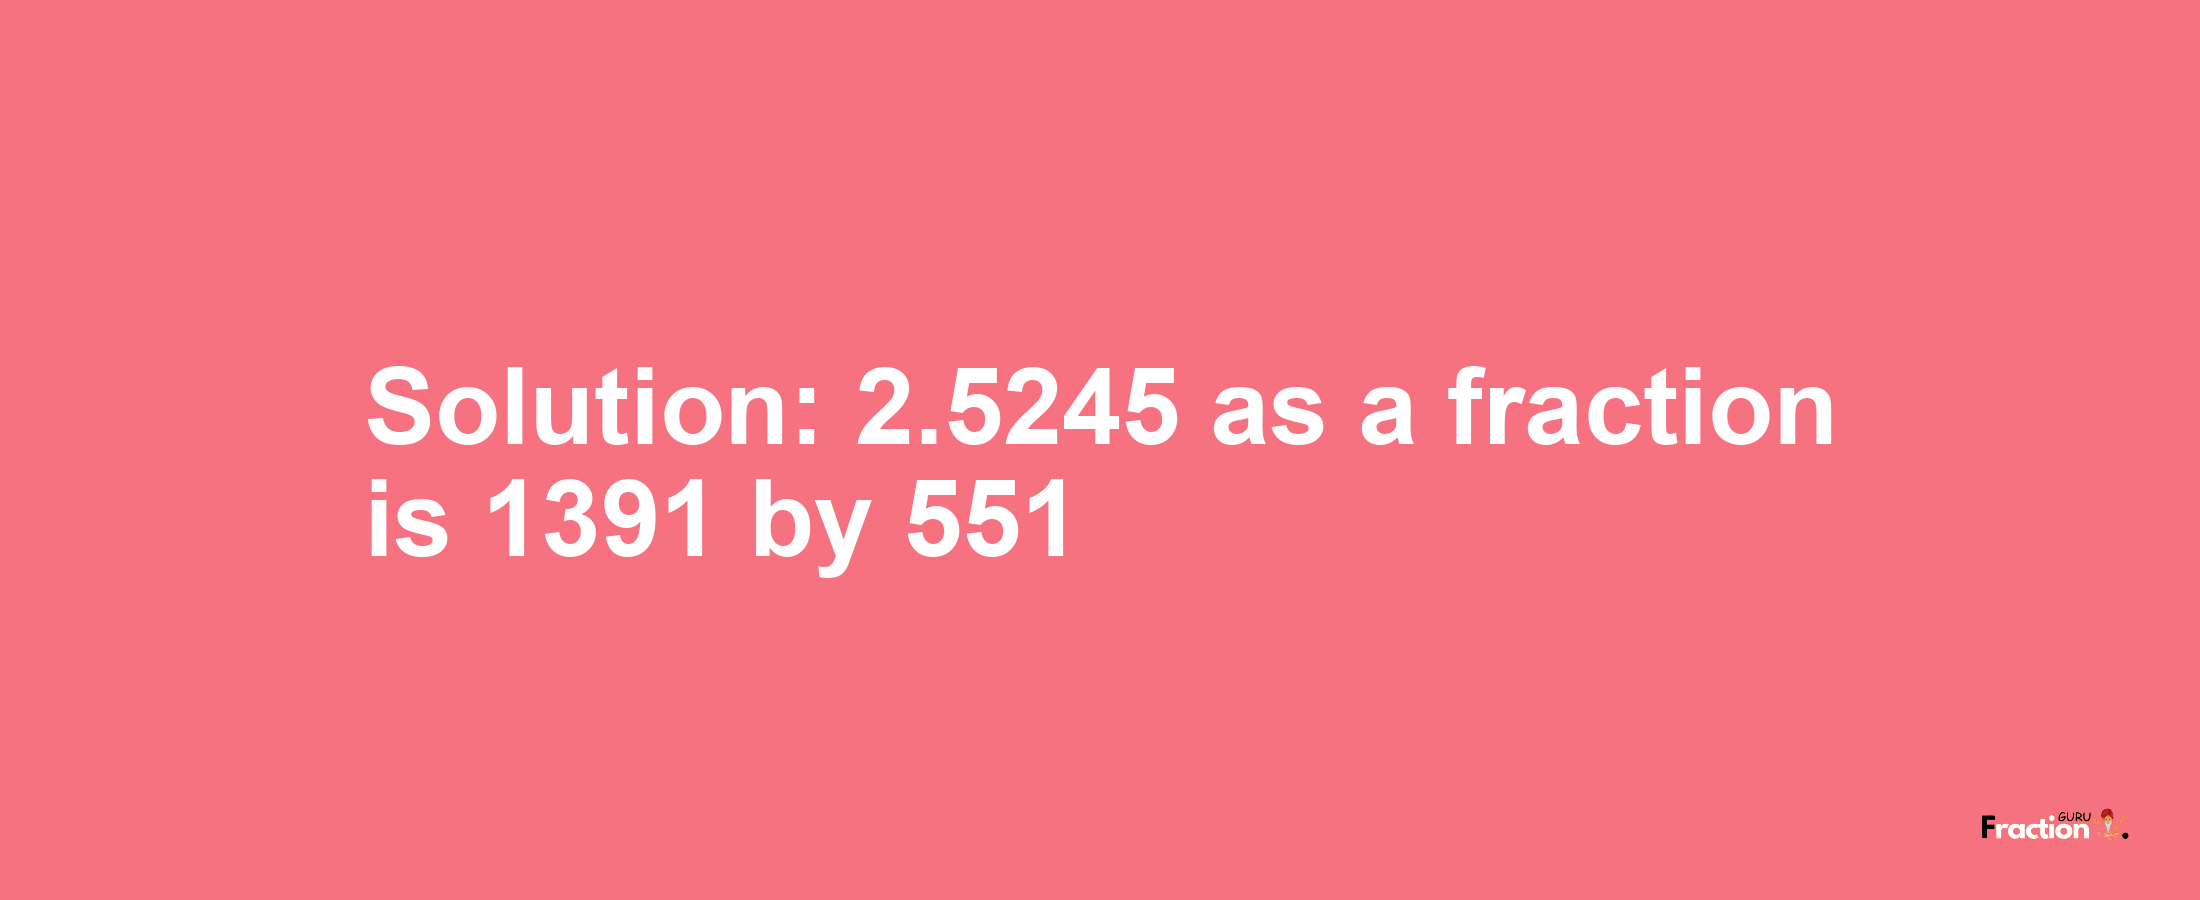 Solution:2.5245 as a fraction is 1391/551